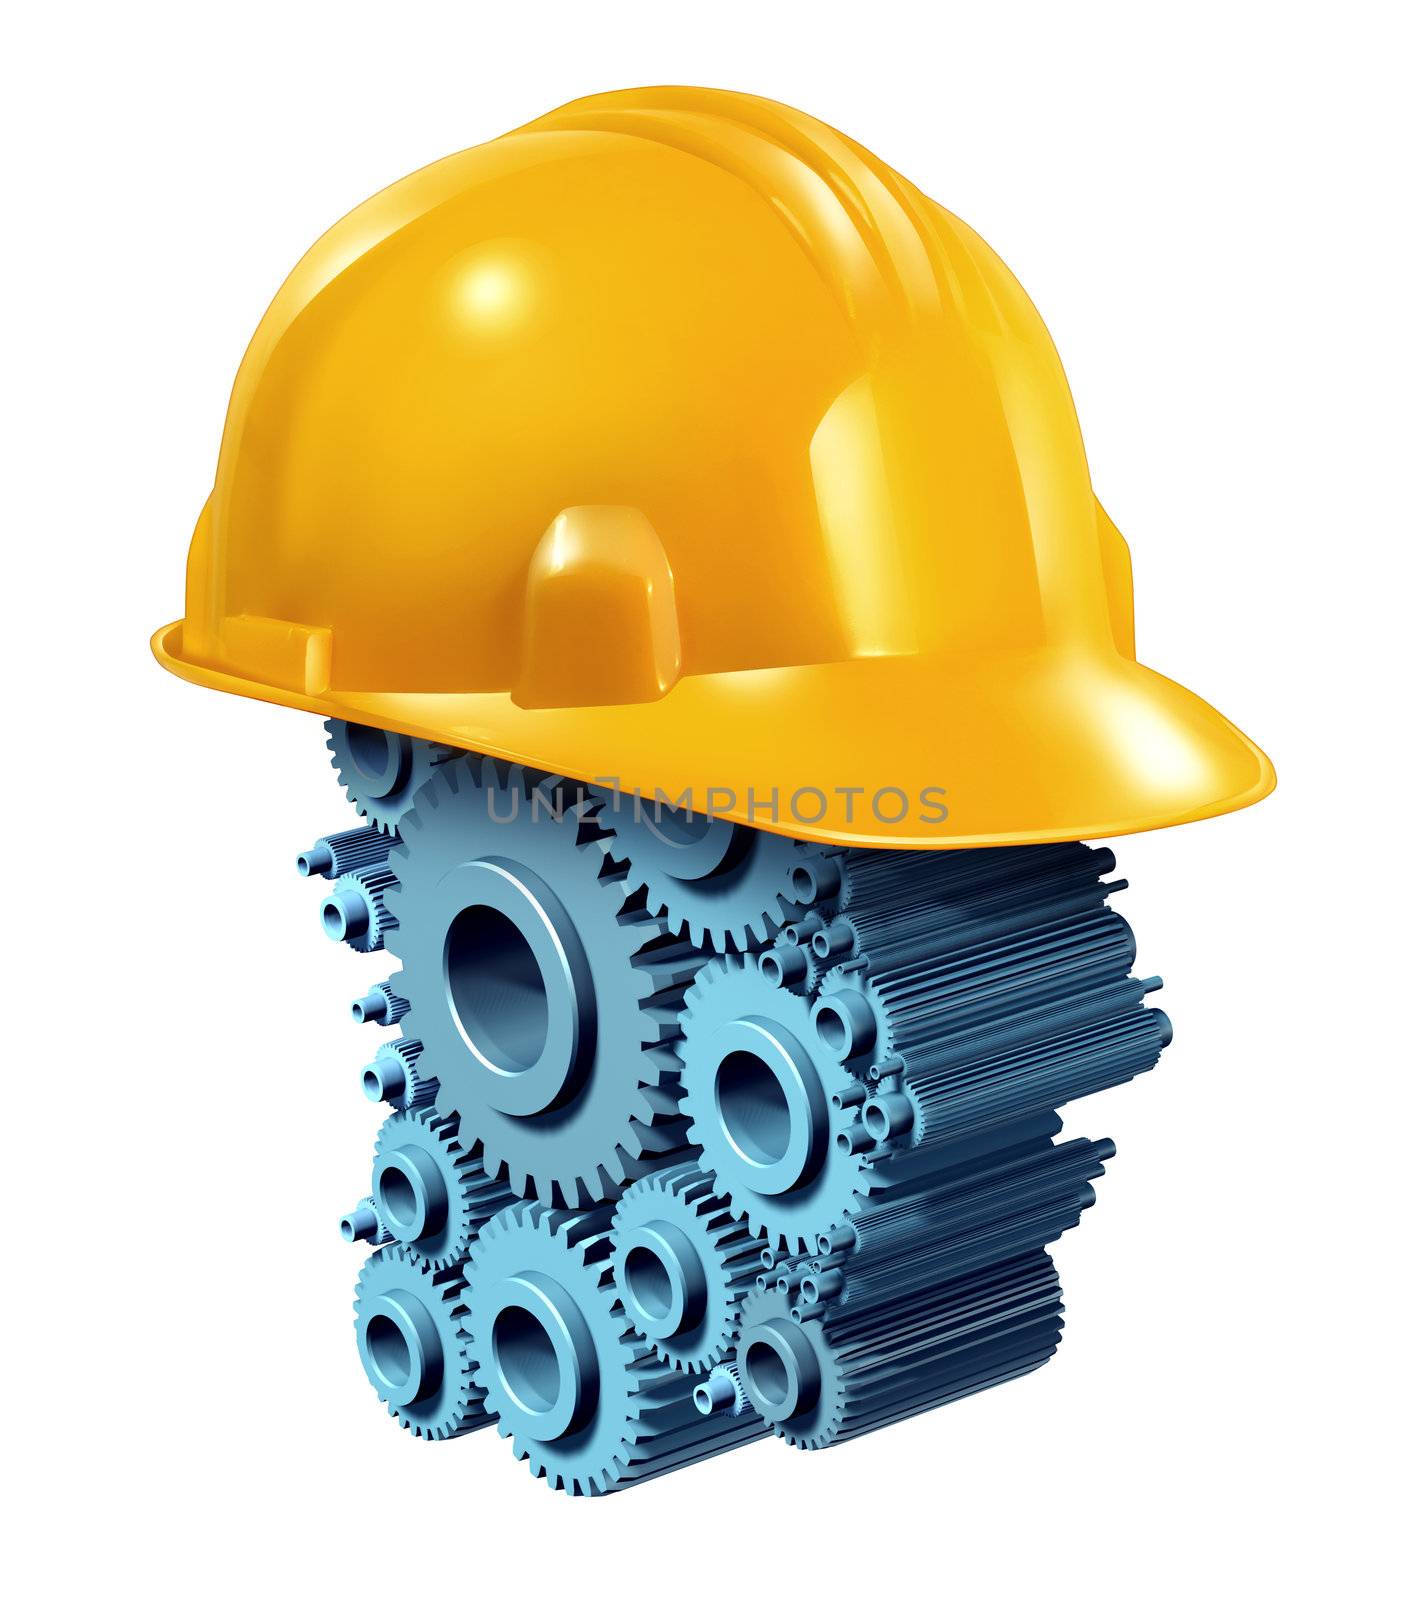 Construction working industry concept with a yellow hard hat over a human head shape made of gears and cogs as a building business symbol of workers in residential and commercial real estate.